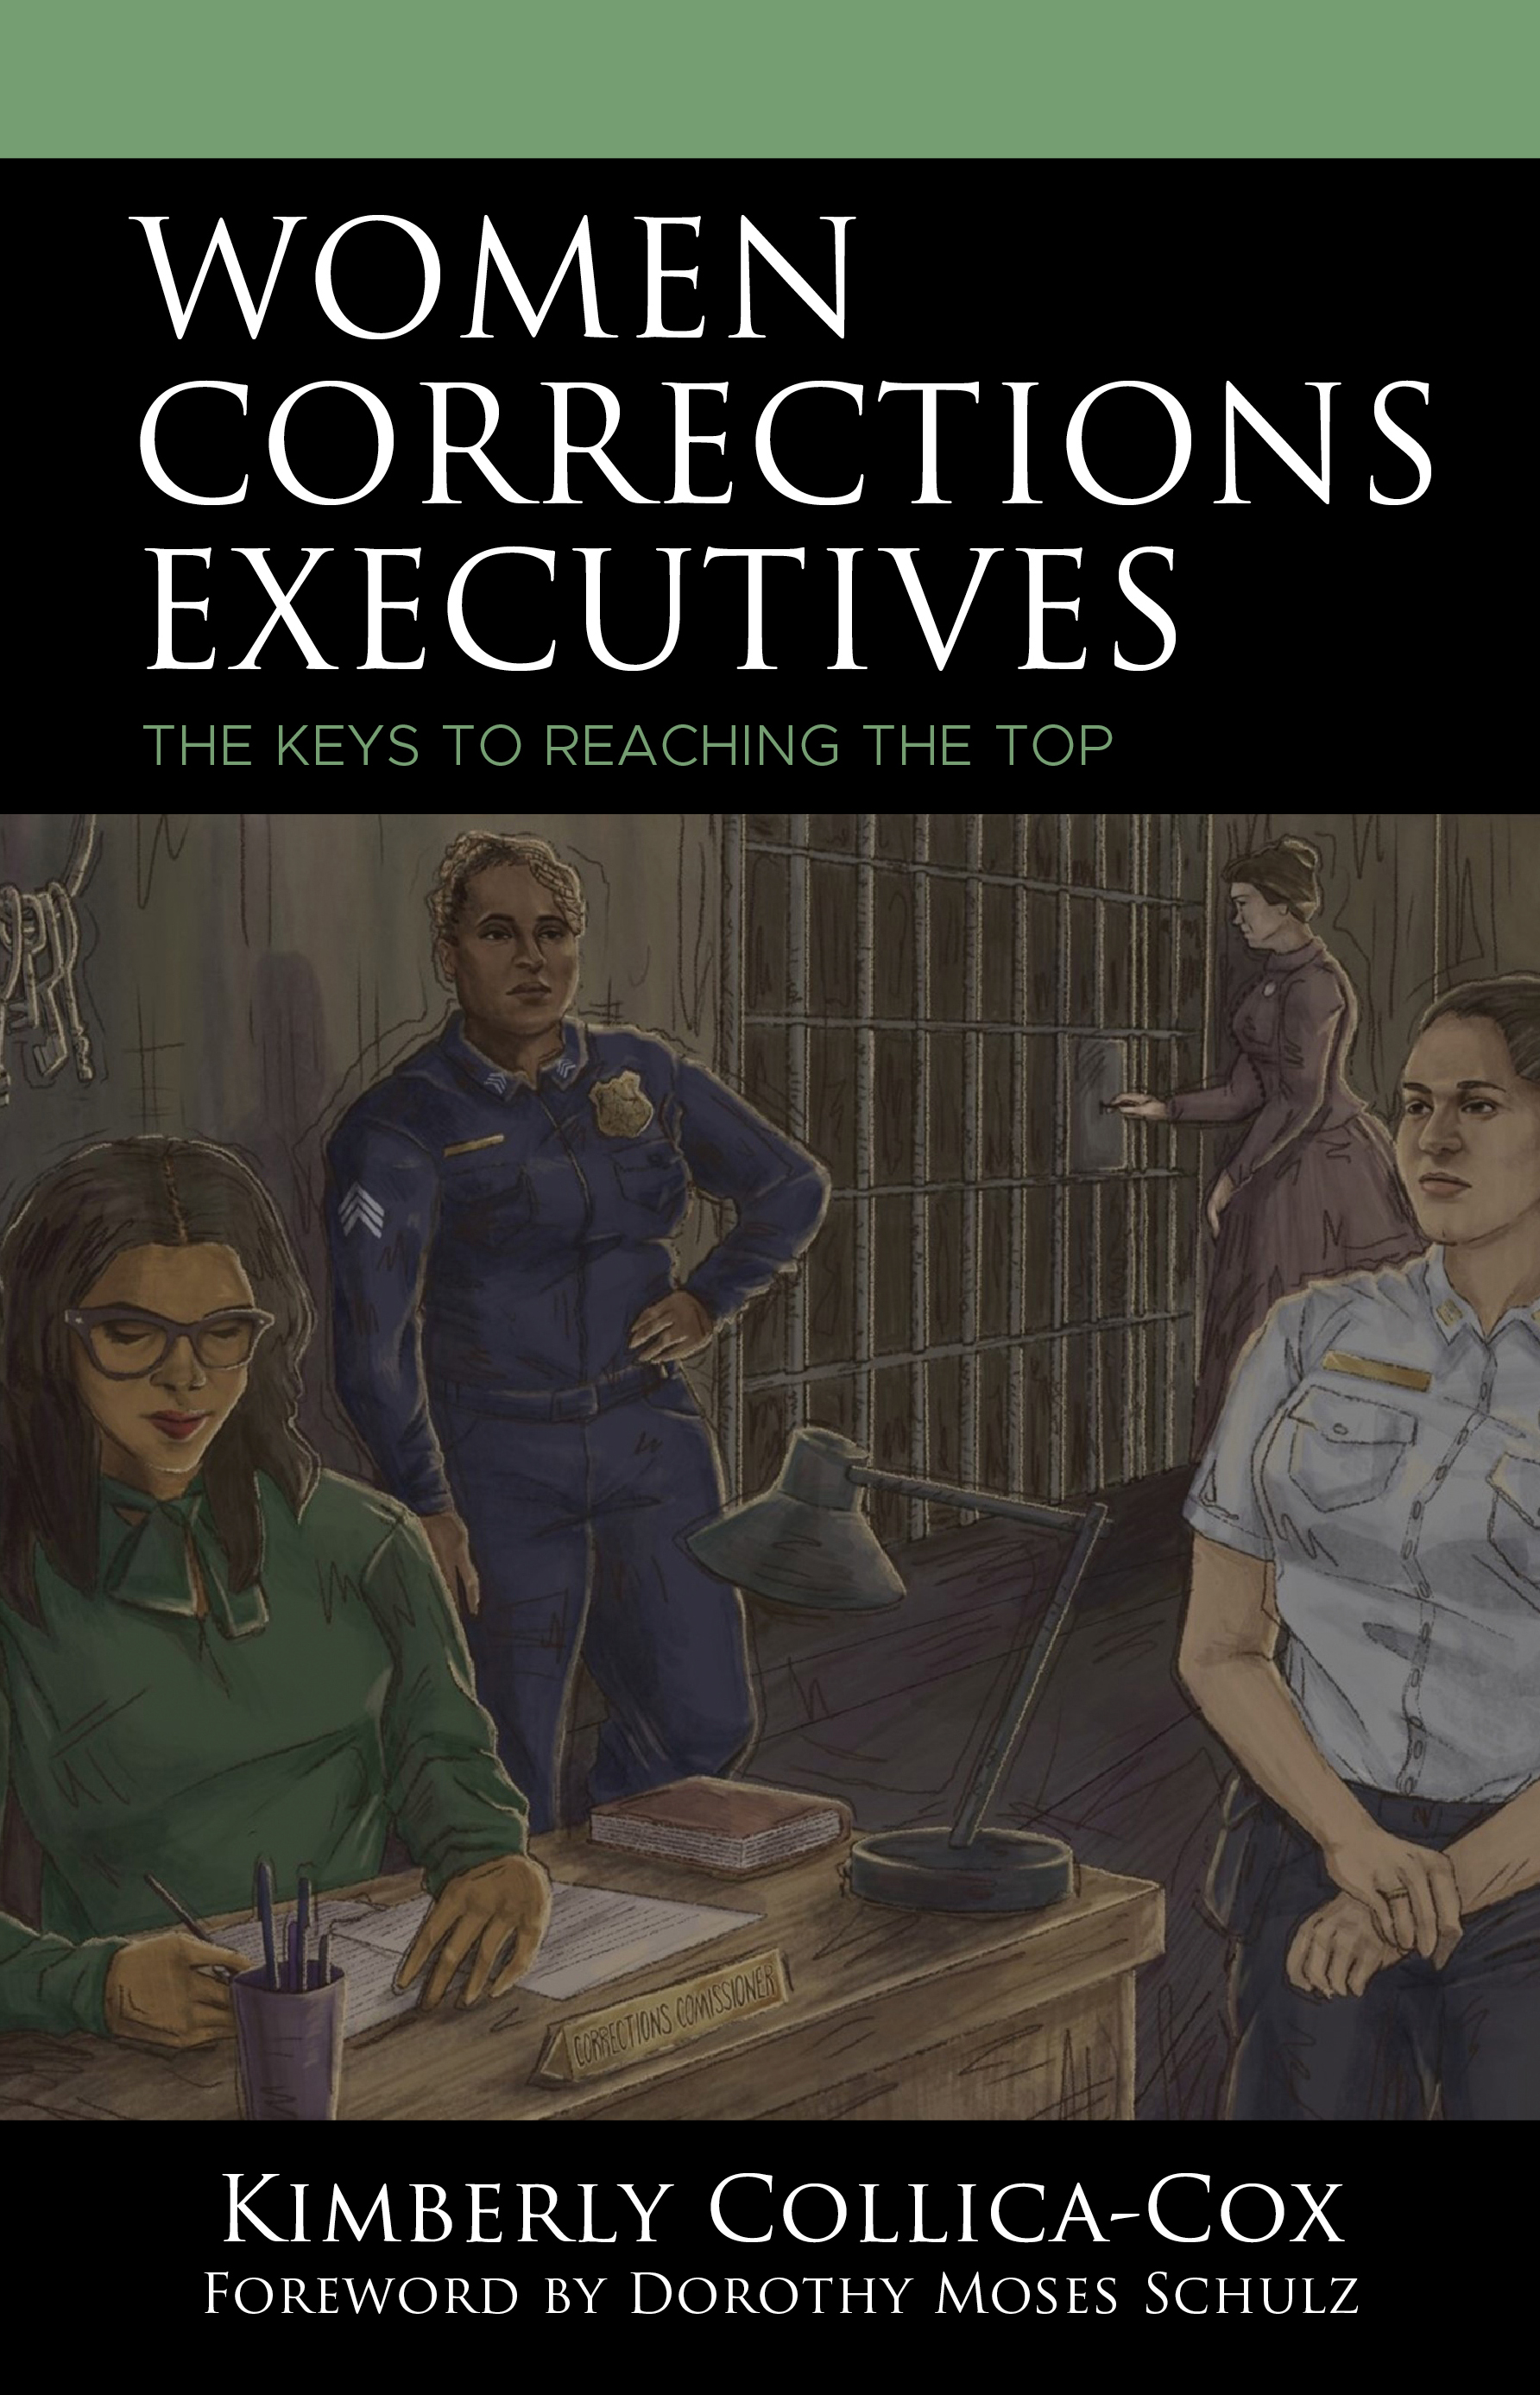 Women Corrections Executives: The Keys to Reaching the Top